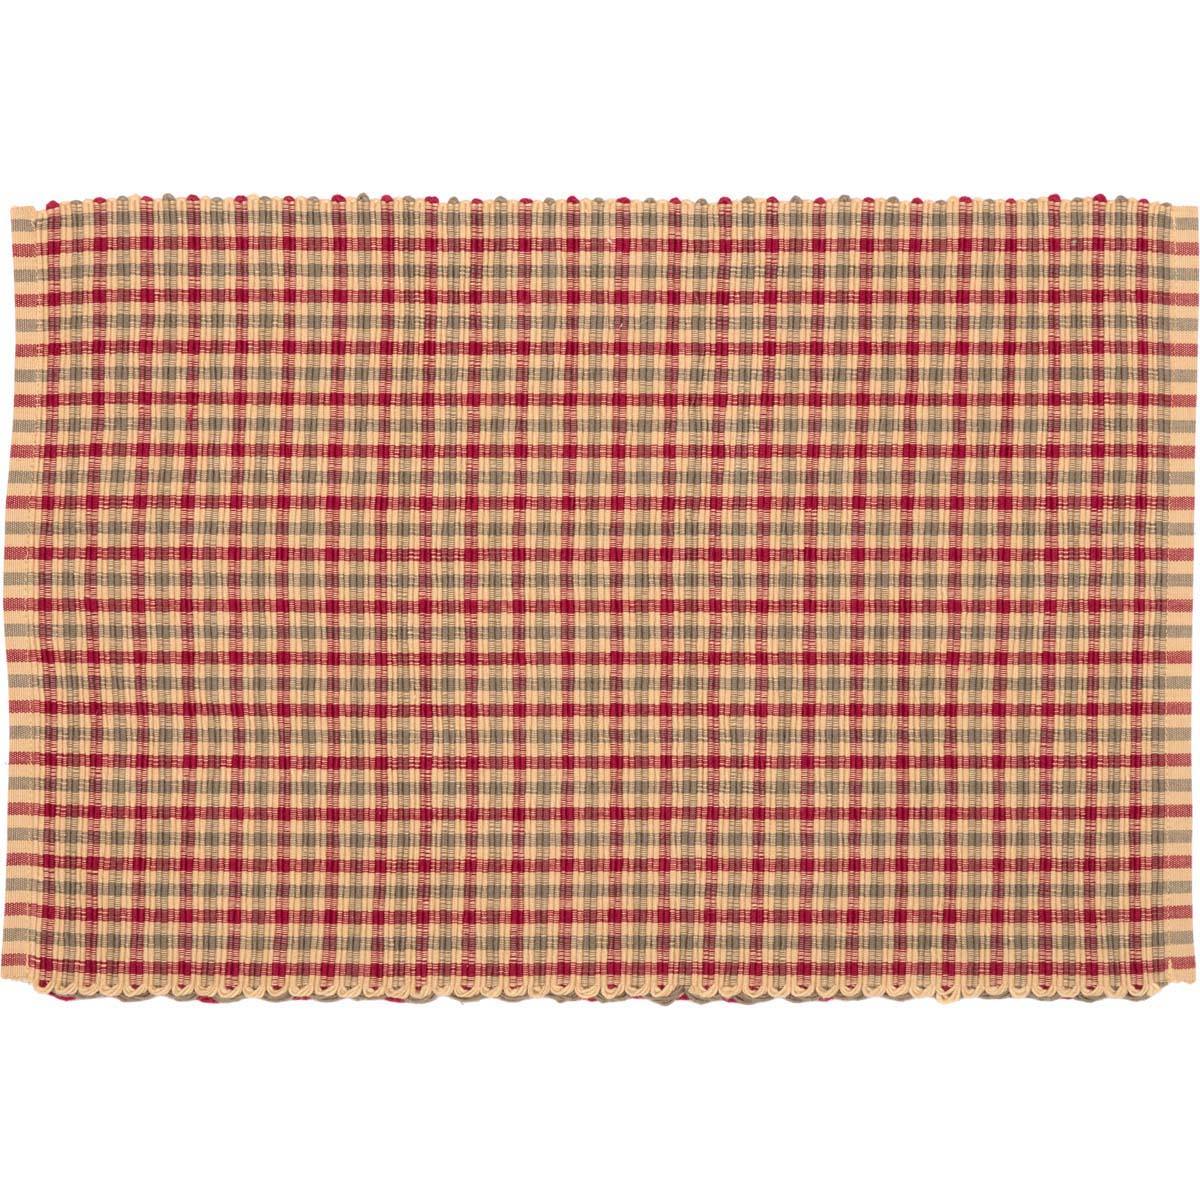 Jonathan Plaid Ribbed Placemat Set of 6 VHC Brands - The Fox Decor